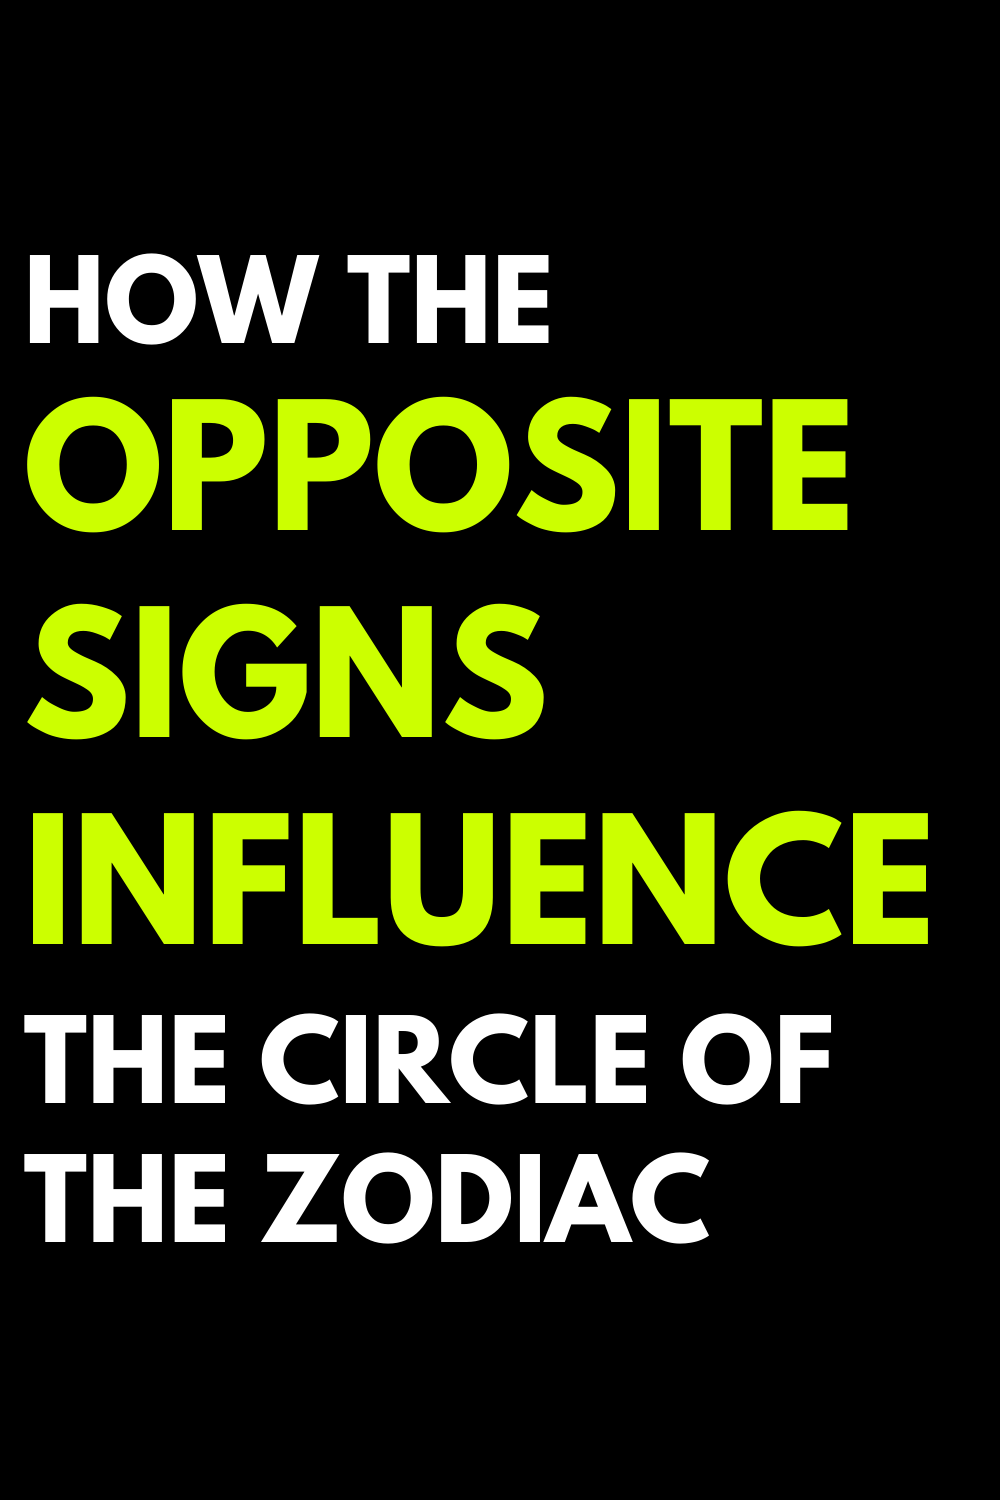 How the opposite signs influence the circle of the zodiac